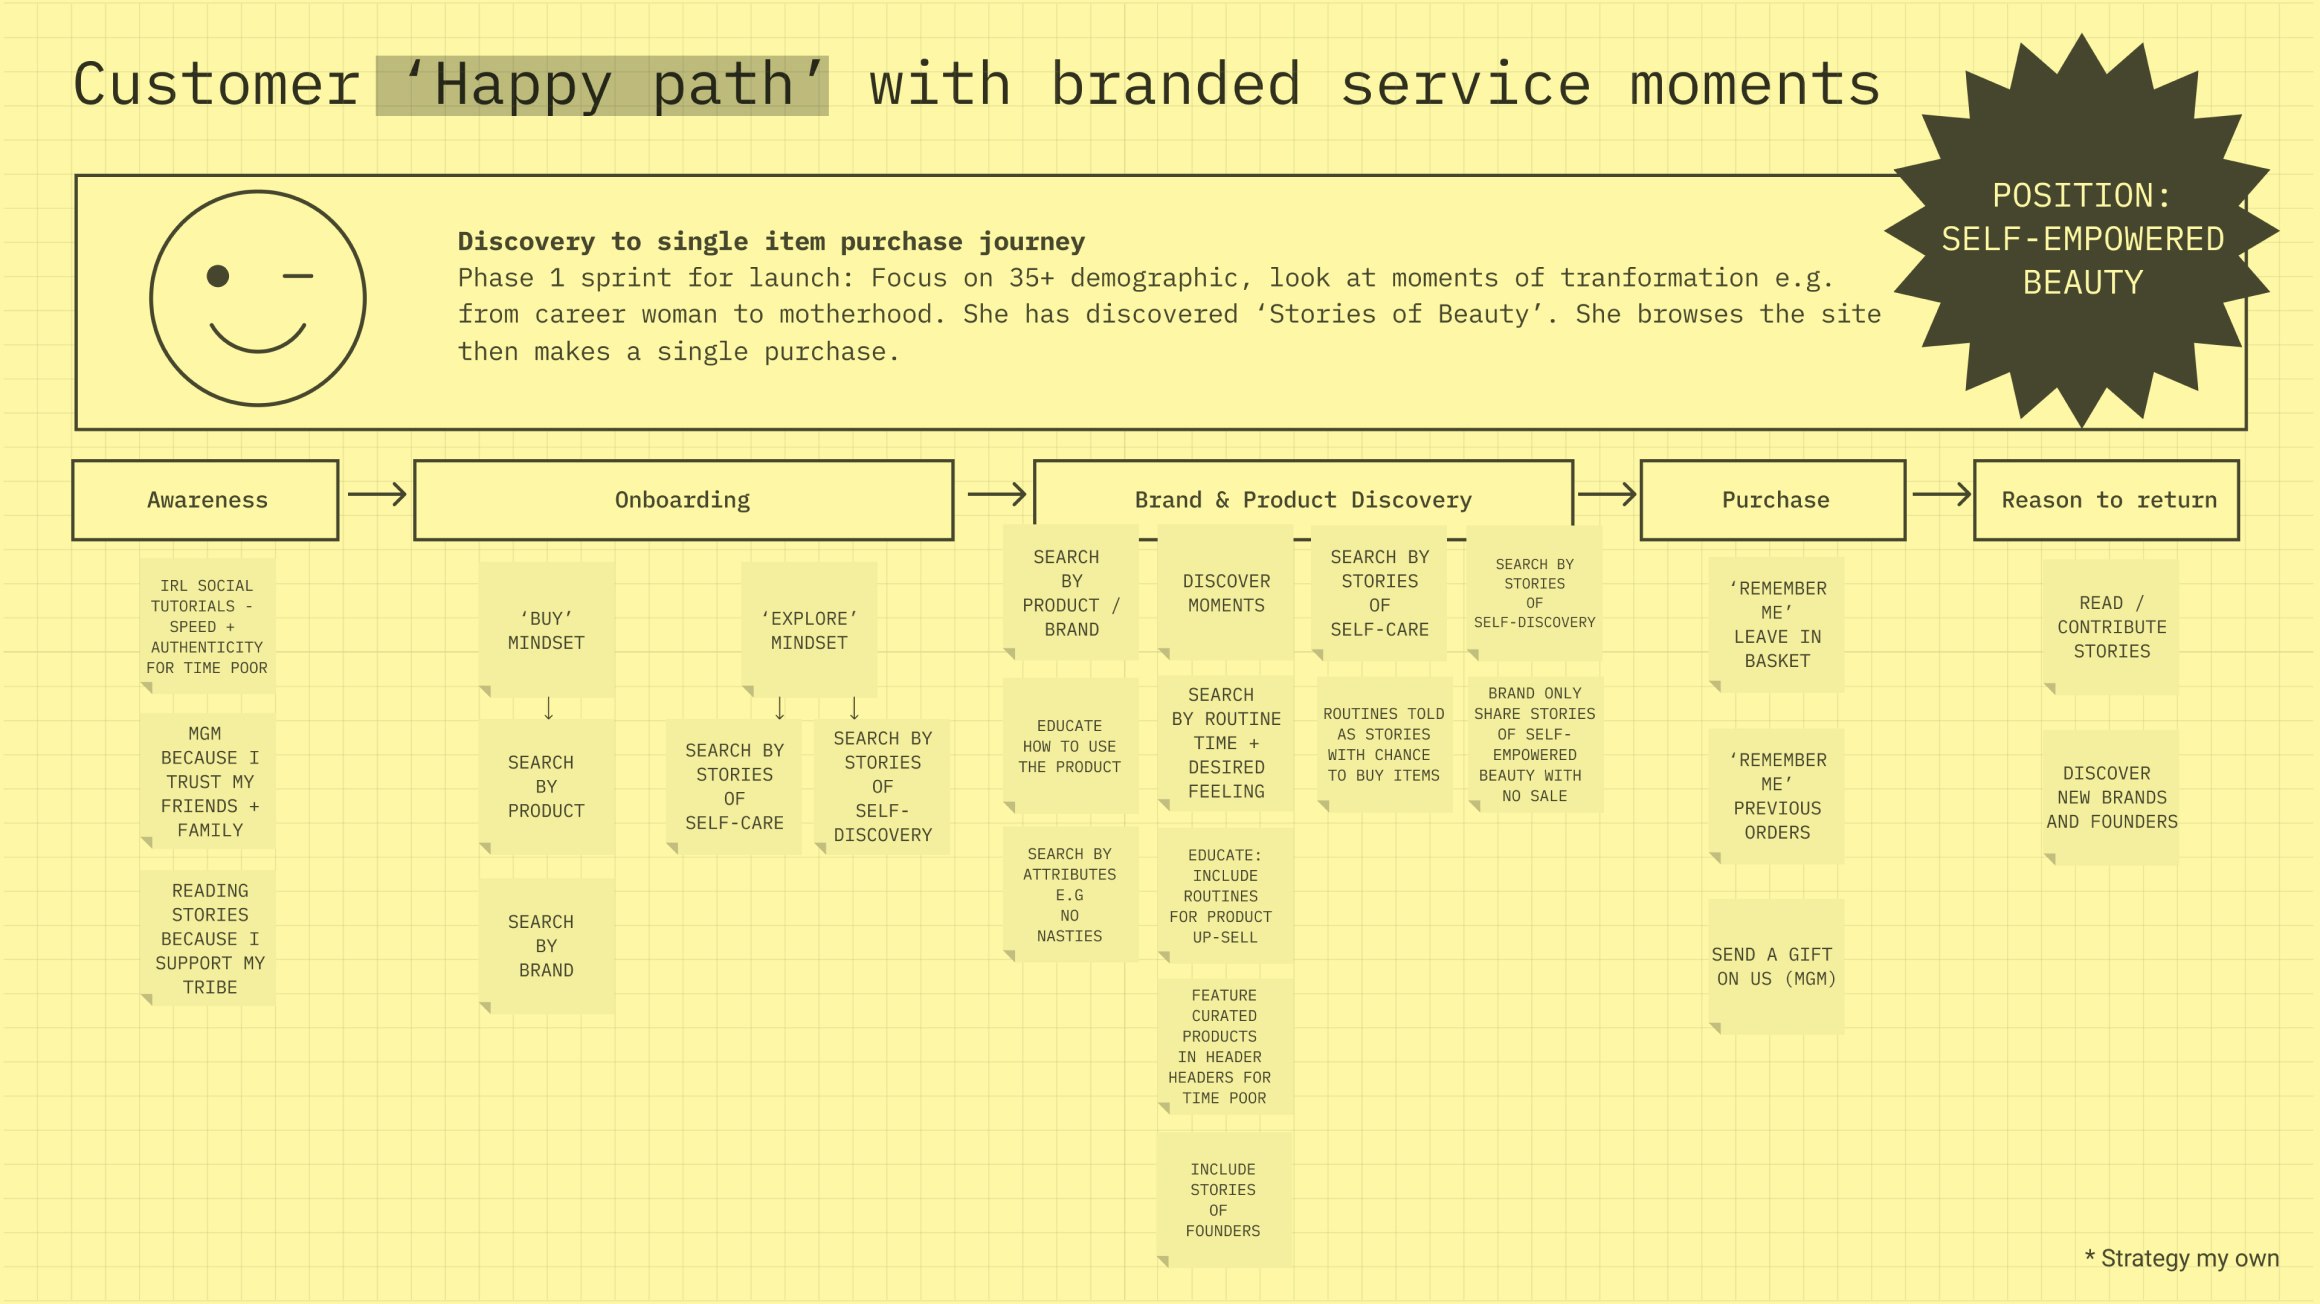 Journey mapping with 'branded' service moments